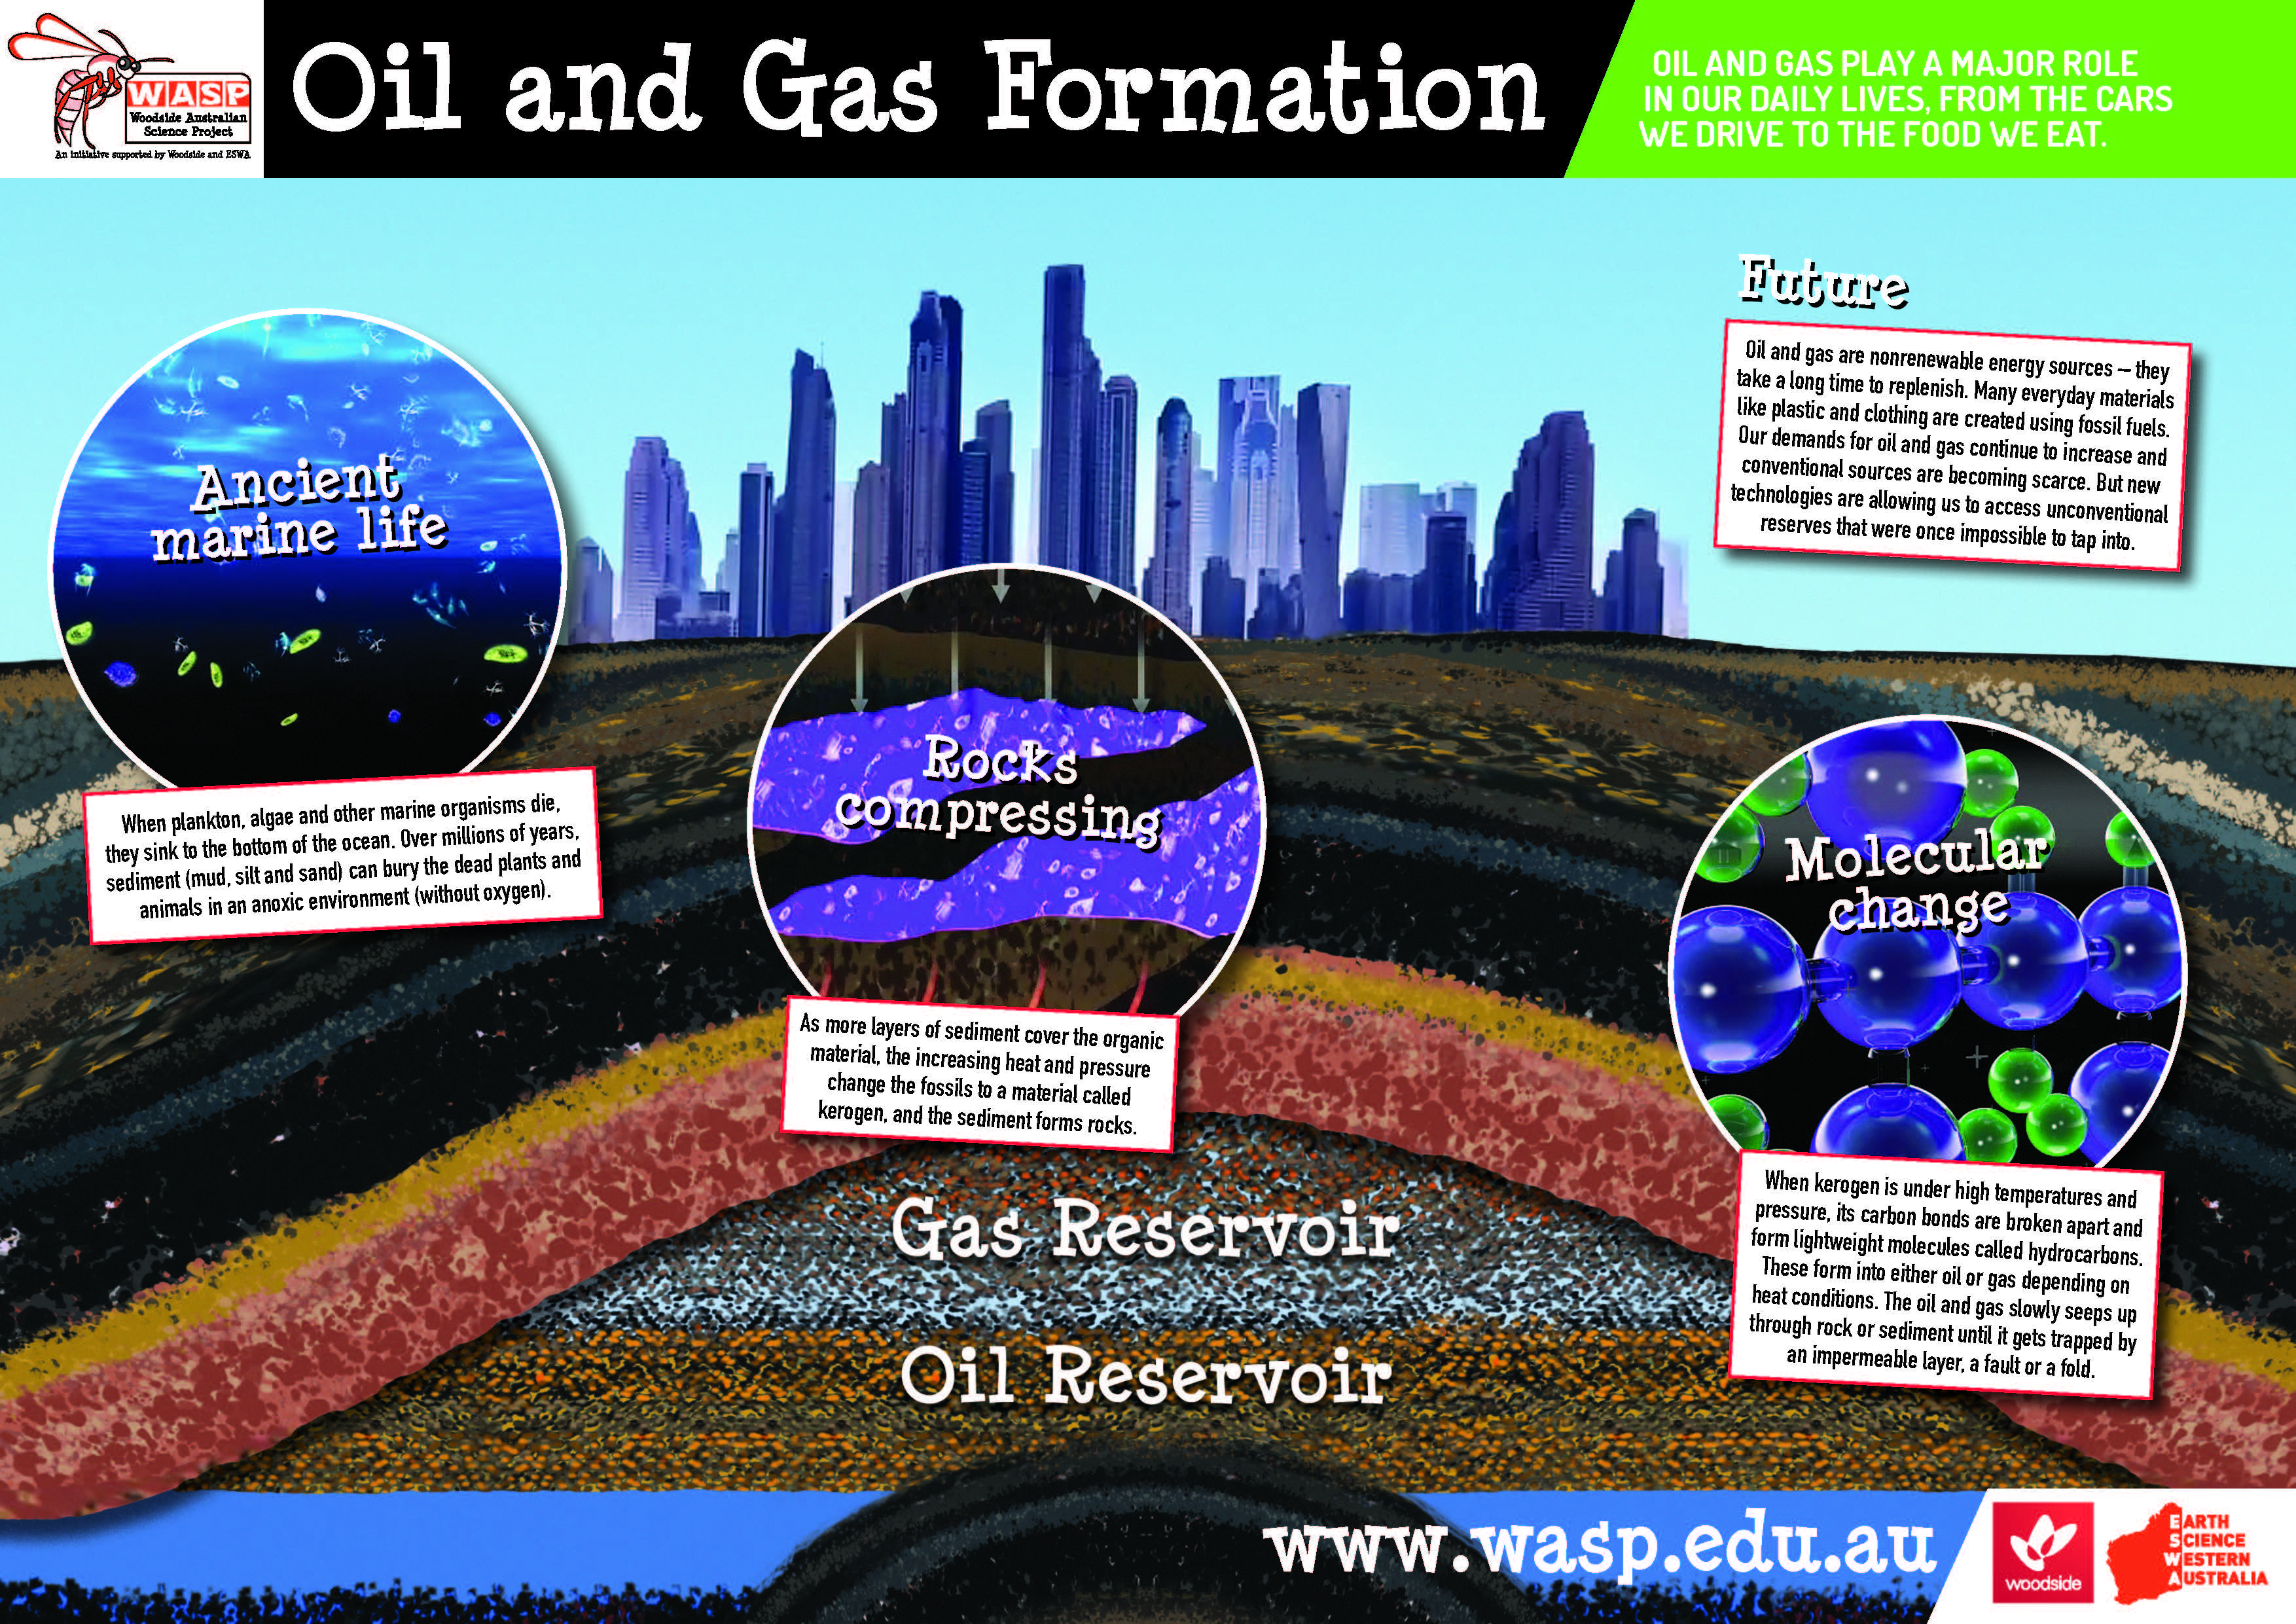 Oil and Gas Formation Poster